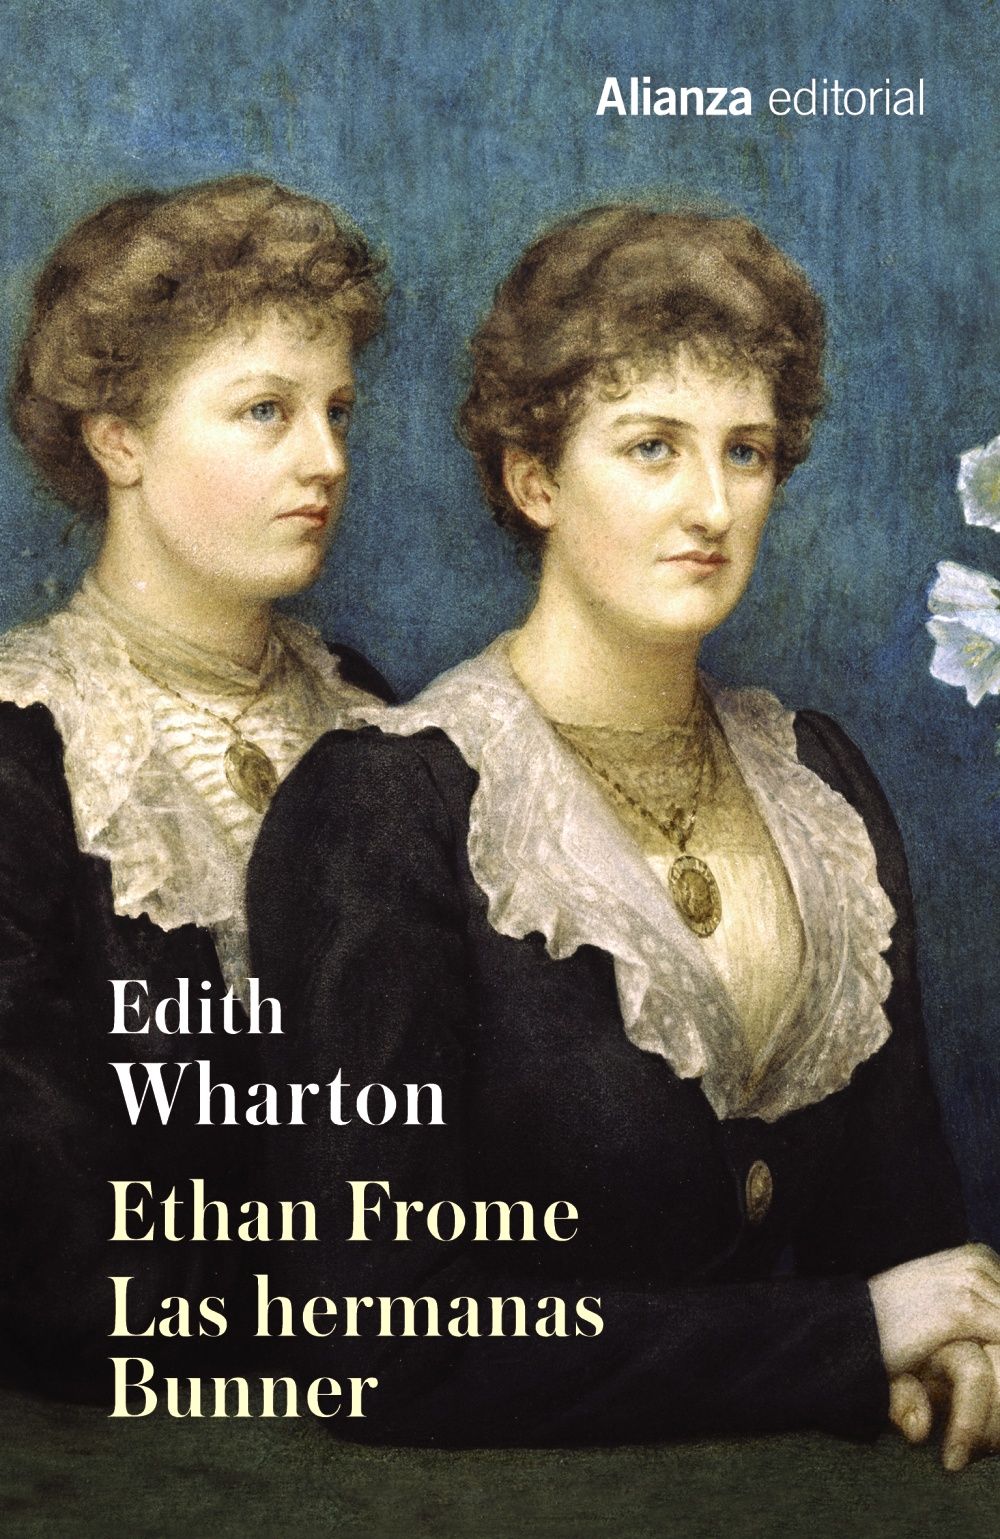 ETHAN FROME. LAS HERMANAS BUNNER. 